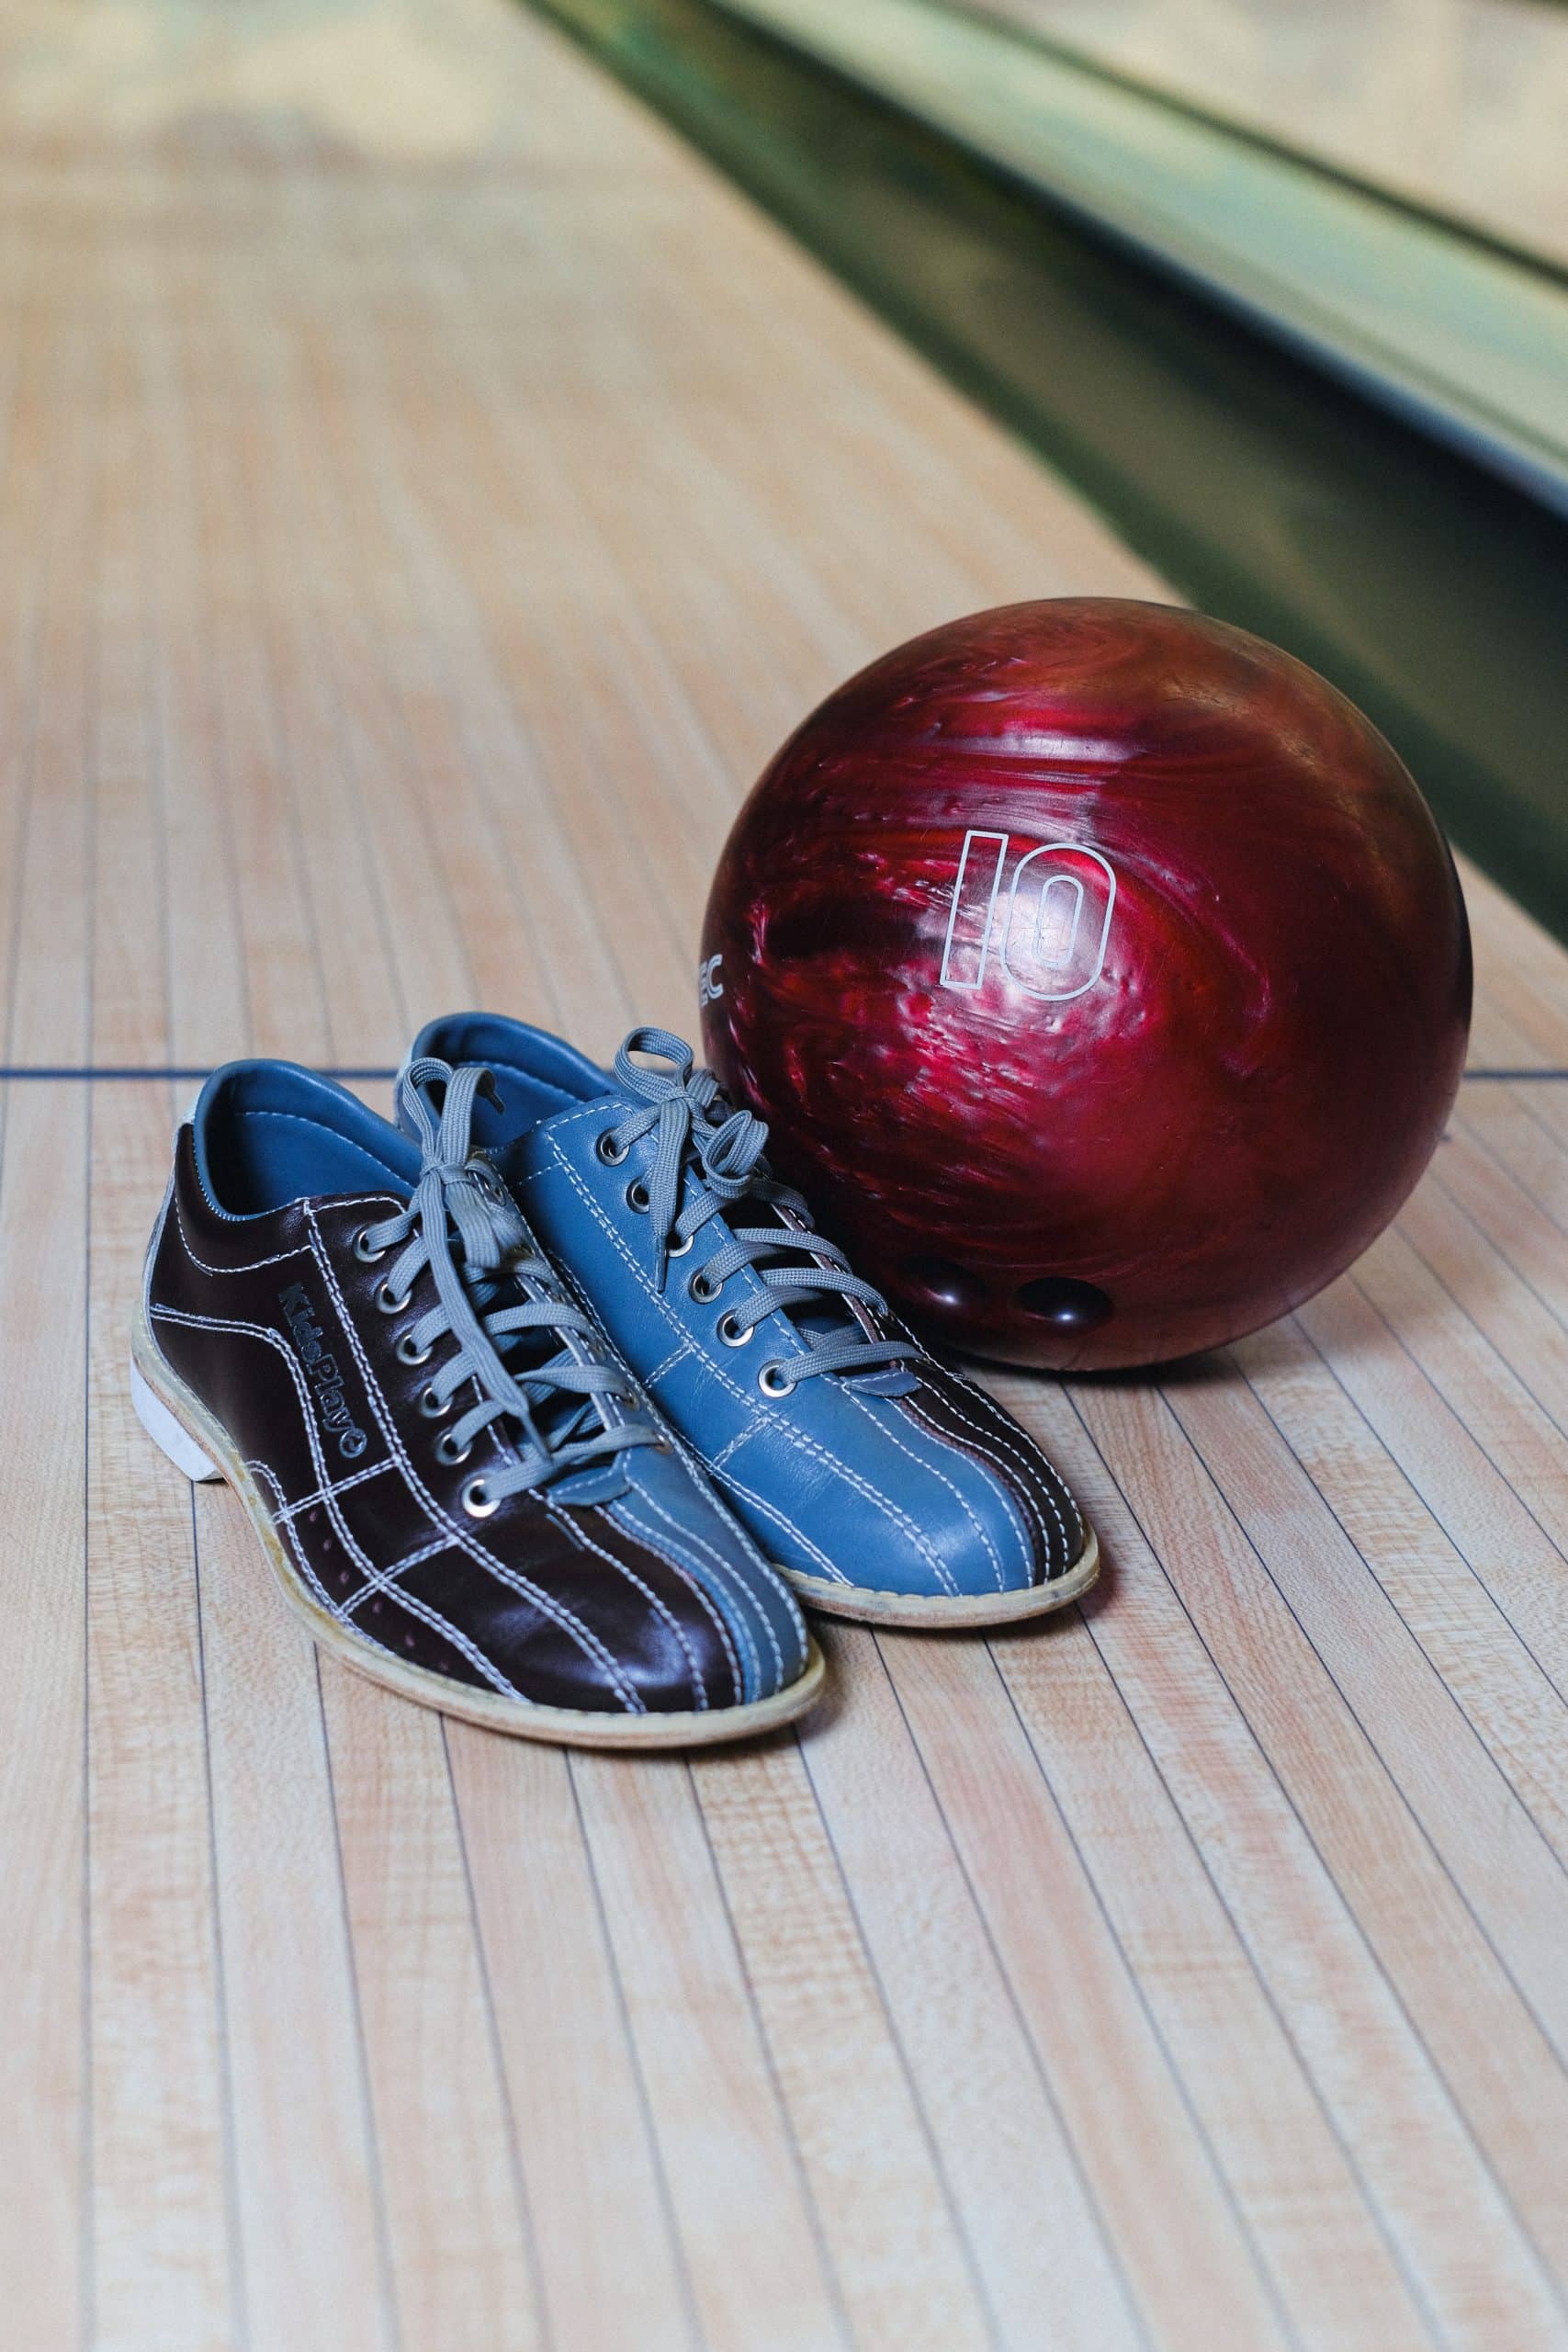 A red bowling ball and pair of blue bowling shoes